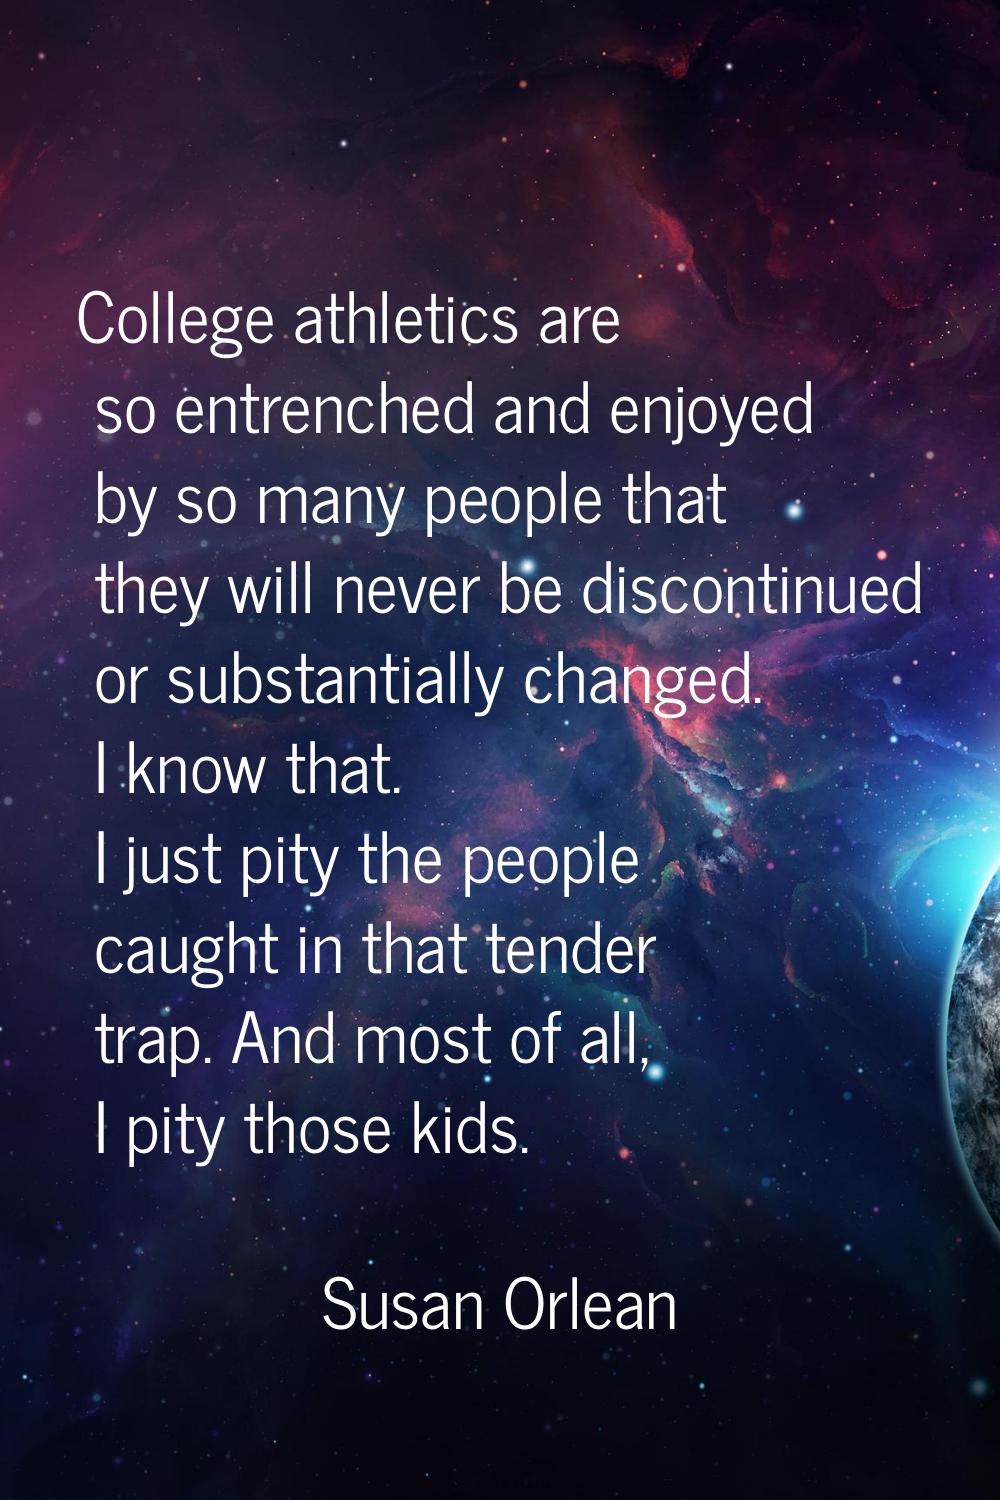 College athletics are so entrenched and enjoyed by so many people that they will never be discontin